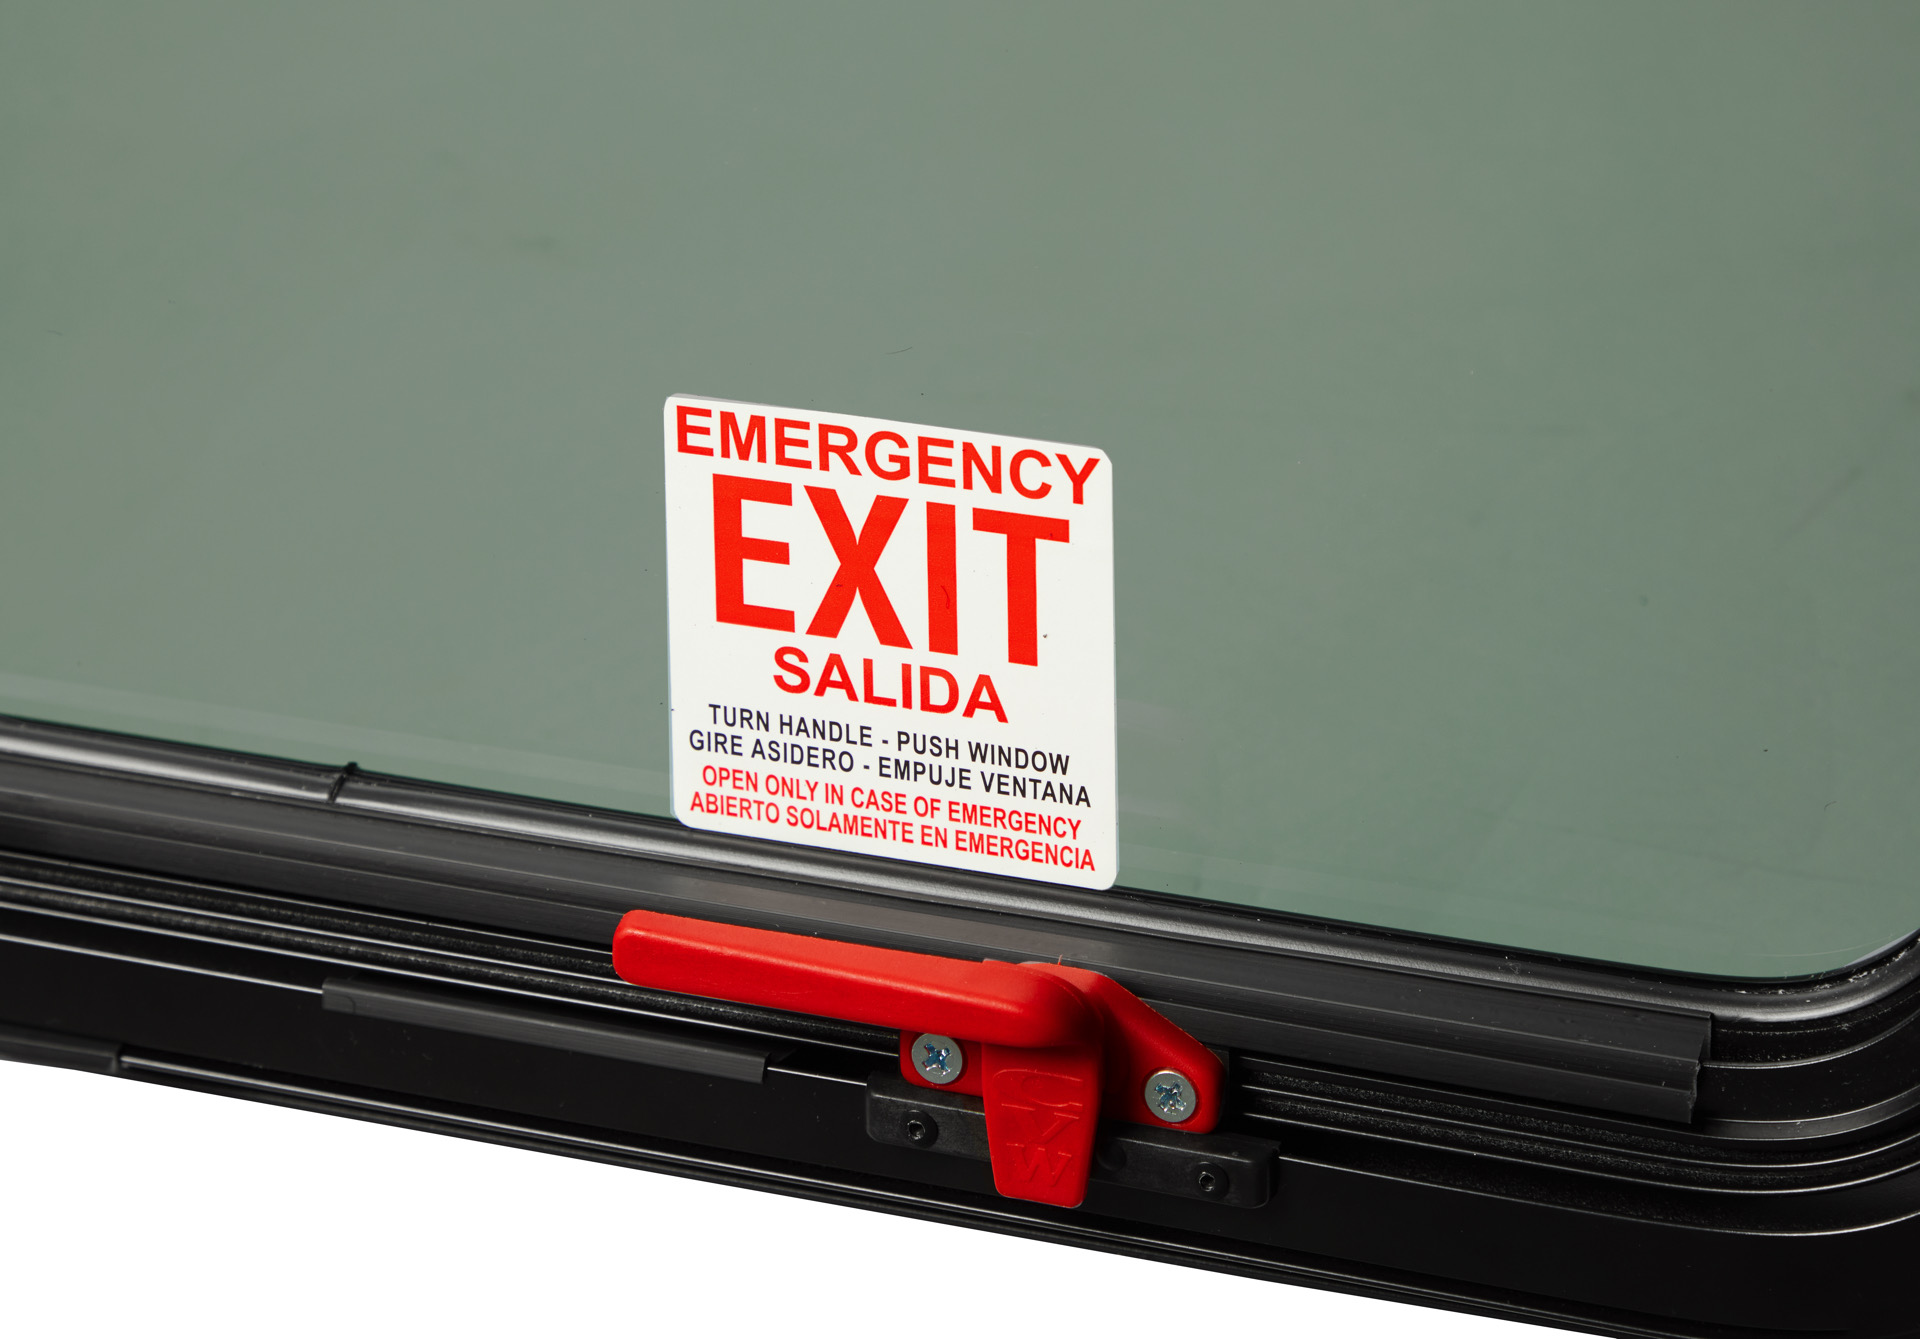 an emergency exit salida sticker on the side of a vehicle